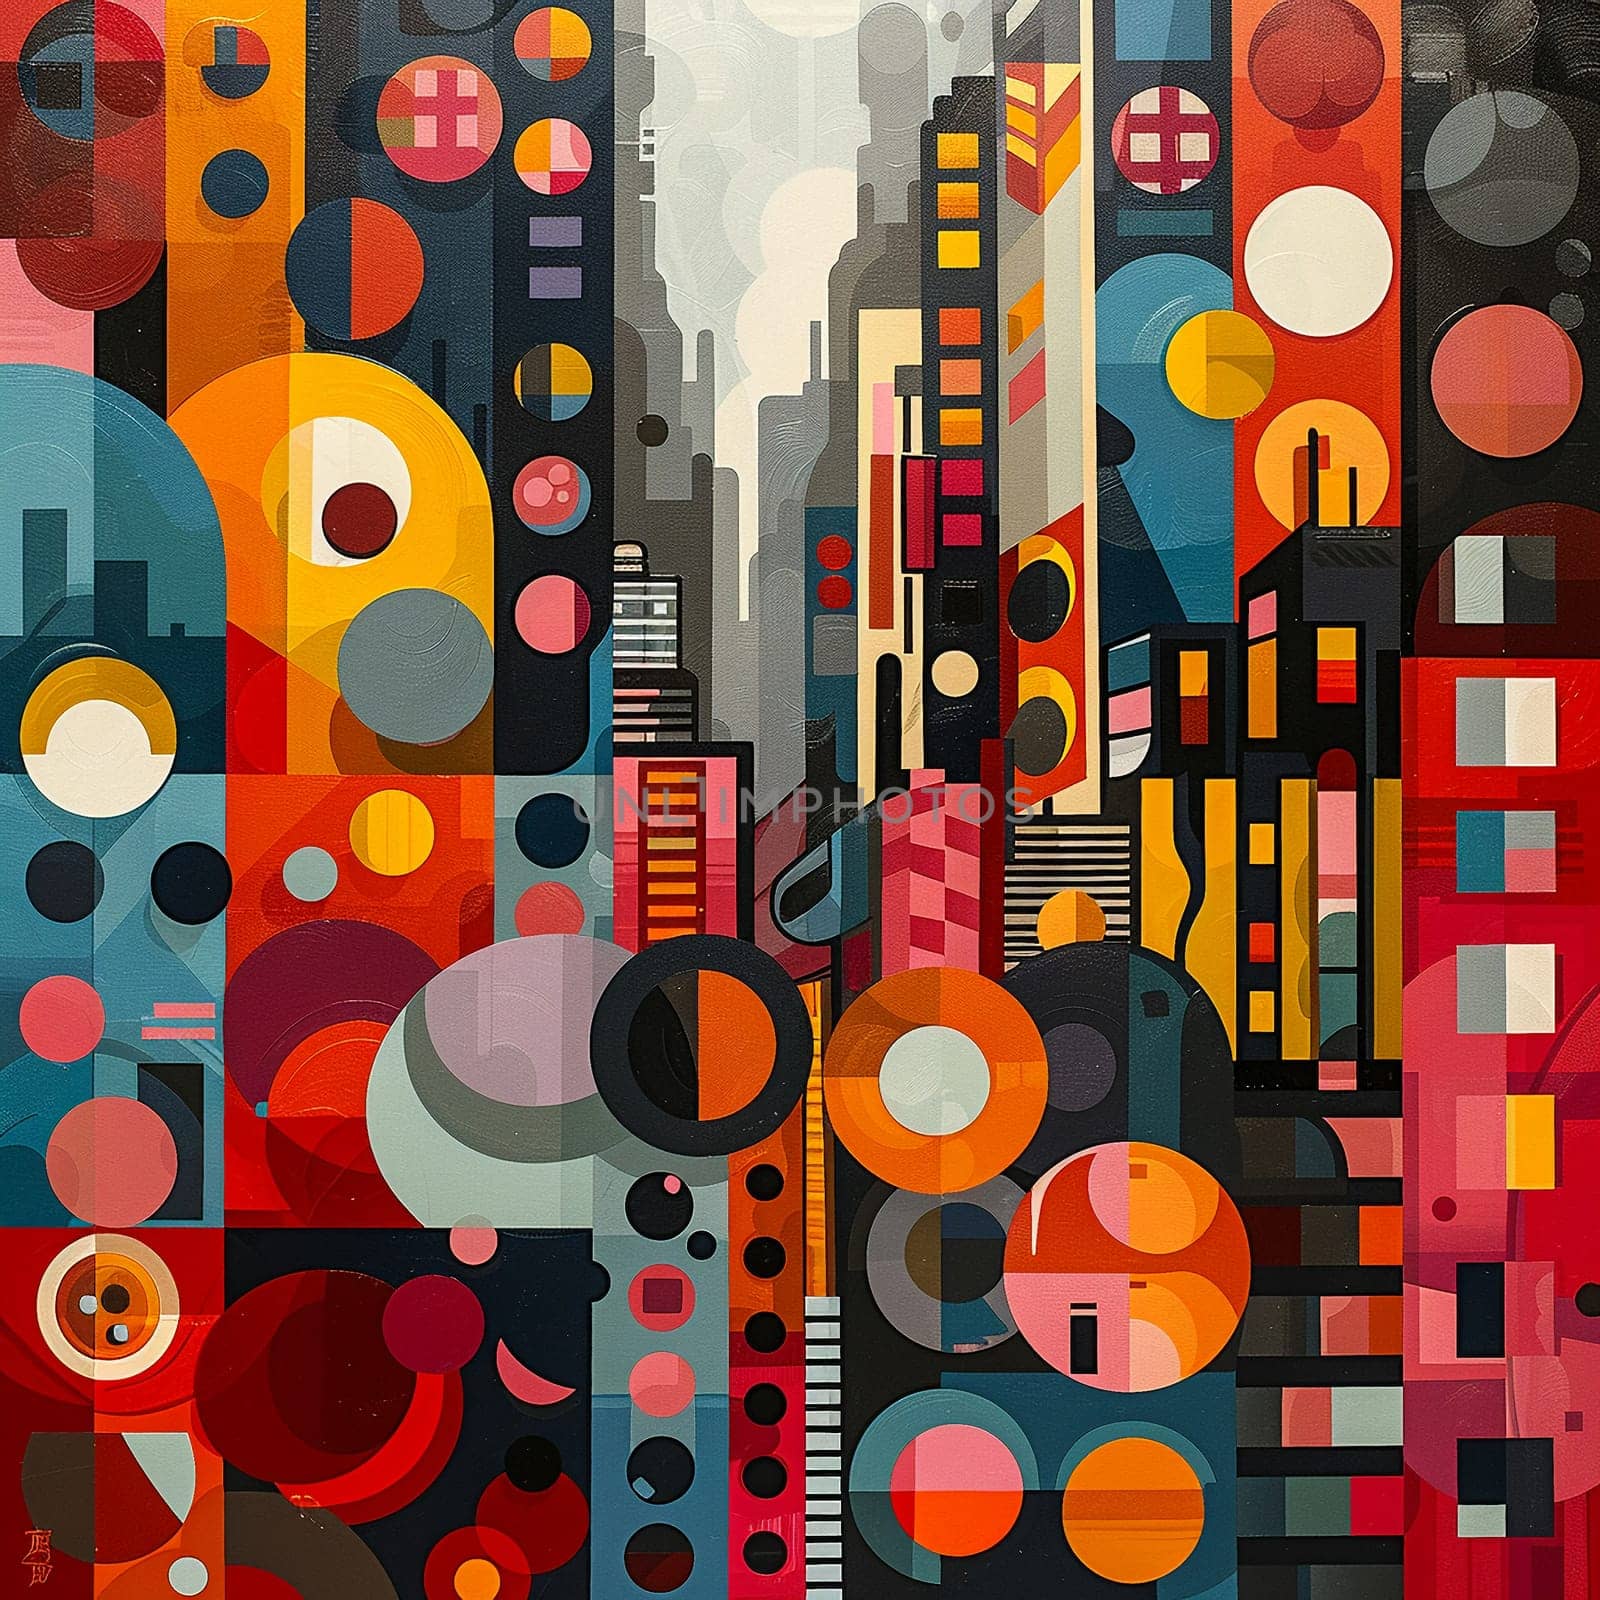 Urban center life captured in a pop art style, with bold colors and repetitive patterns.